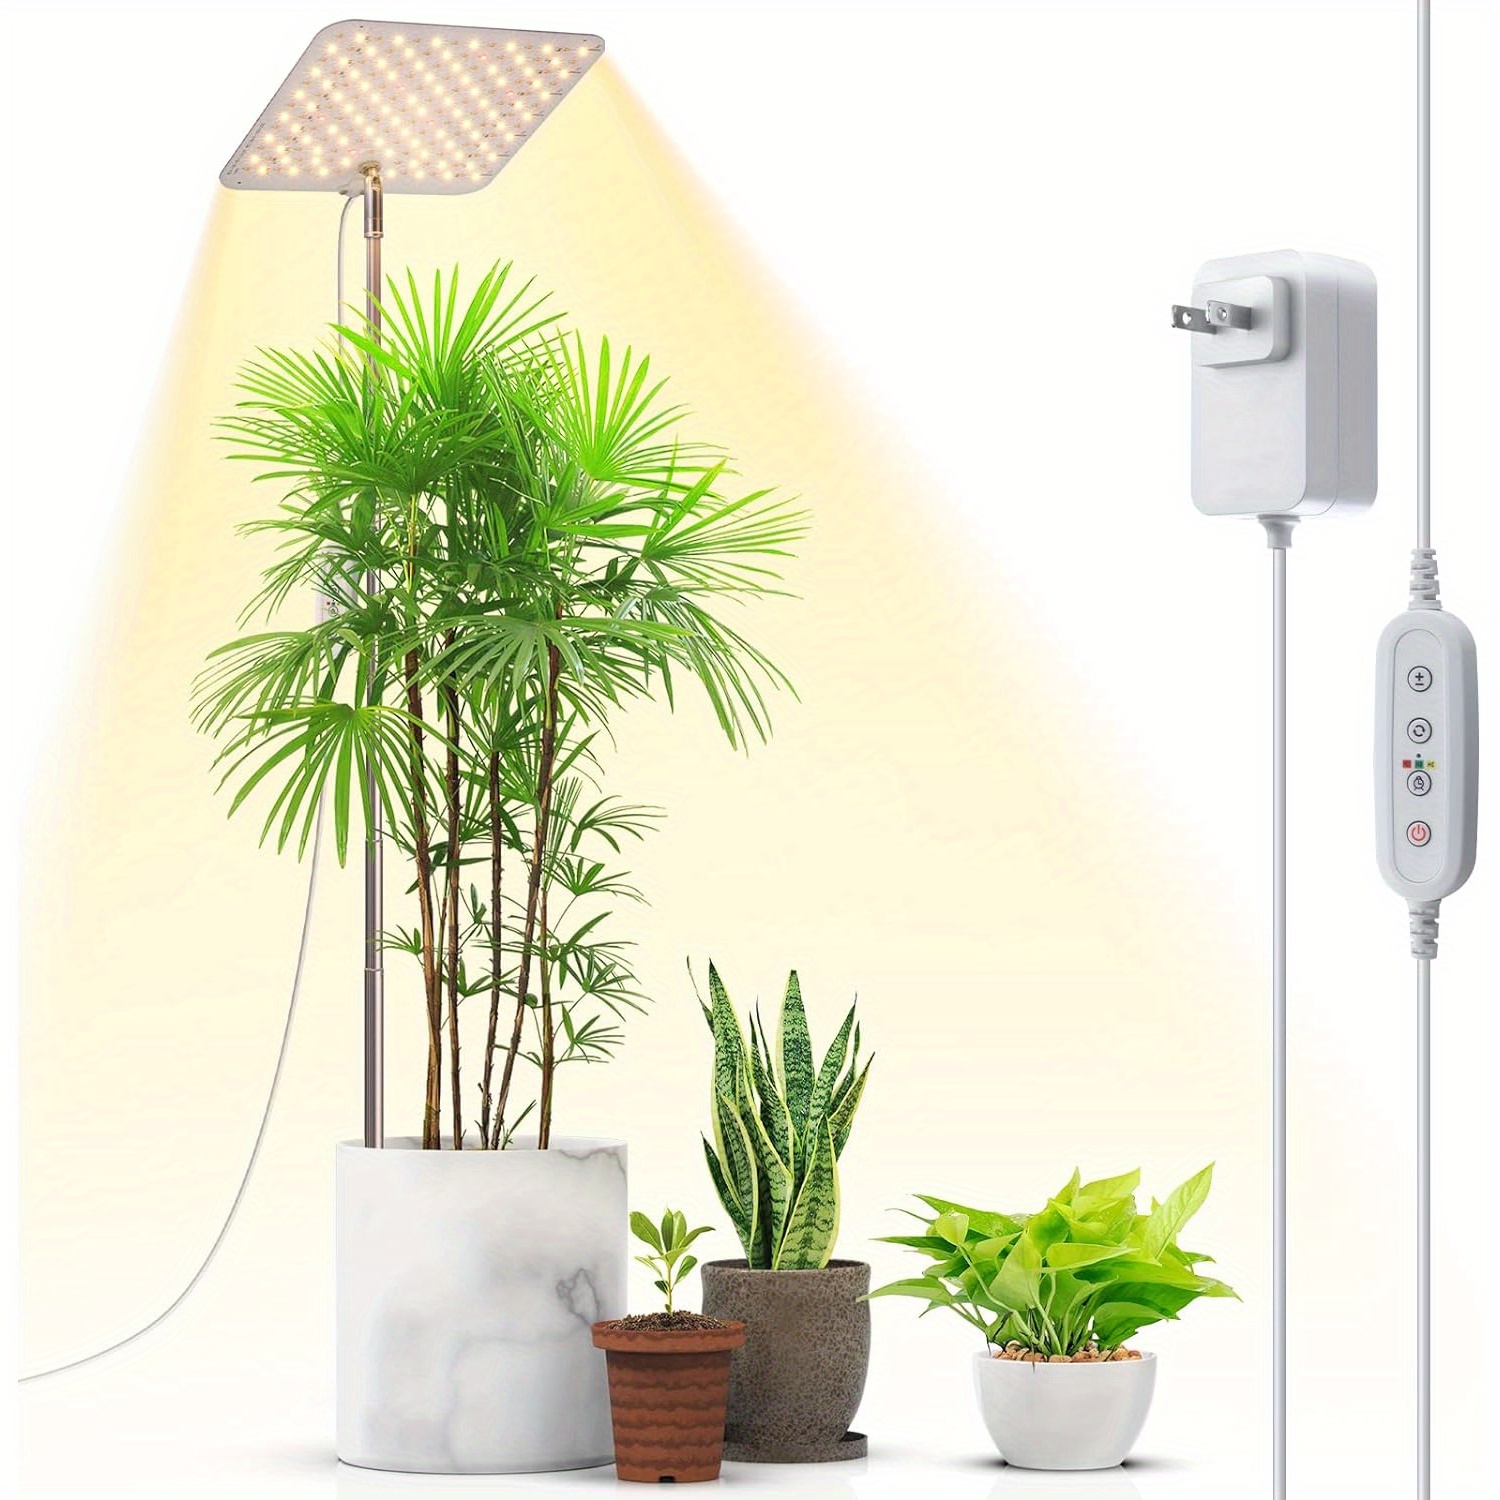 

Plant Grow Light, 182 Leds Full Spectrum Grow Lights For Indoor Plants, Height Adjustable Growing Lamp Fixture With Automatic Timer 3/6/12h, 7 Dimmable Levels, 3 Color Mode For Large Plants